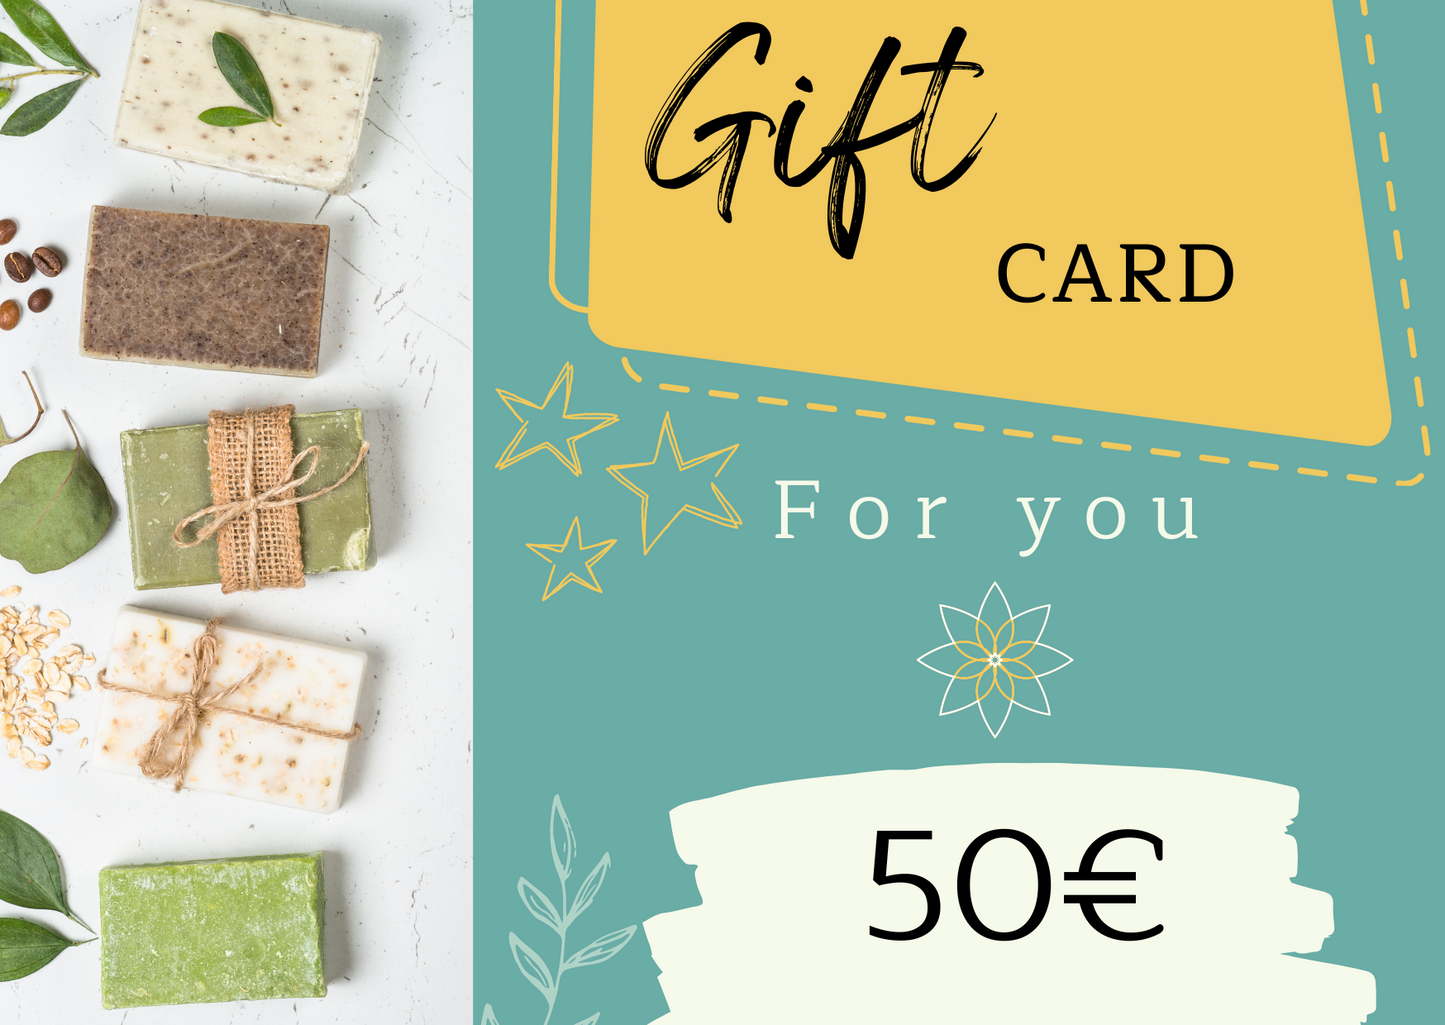 The Gift of Nature Card